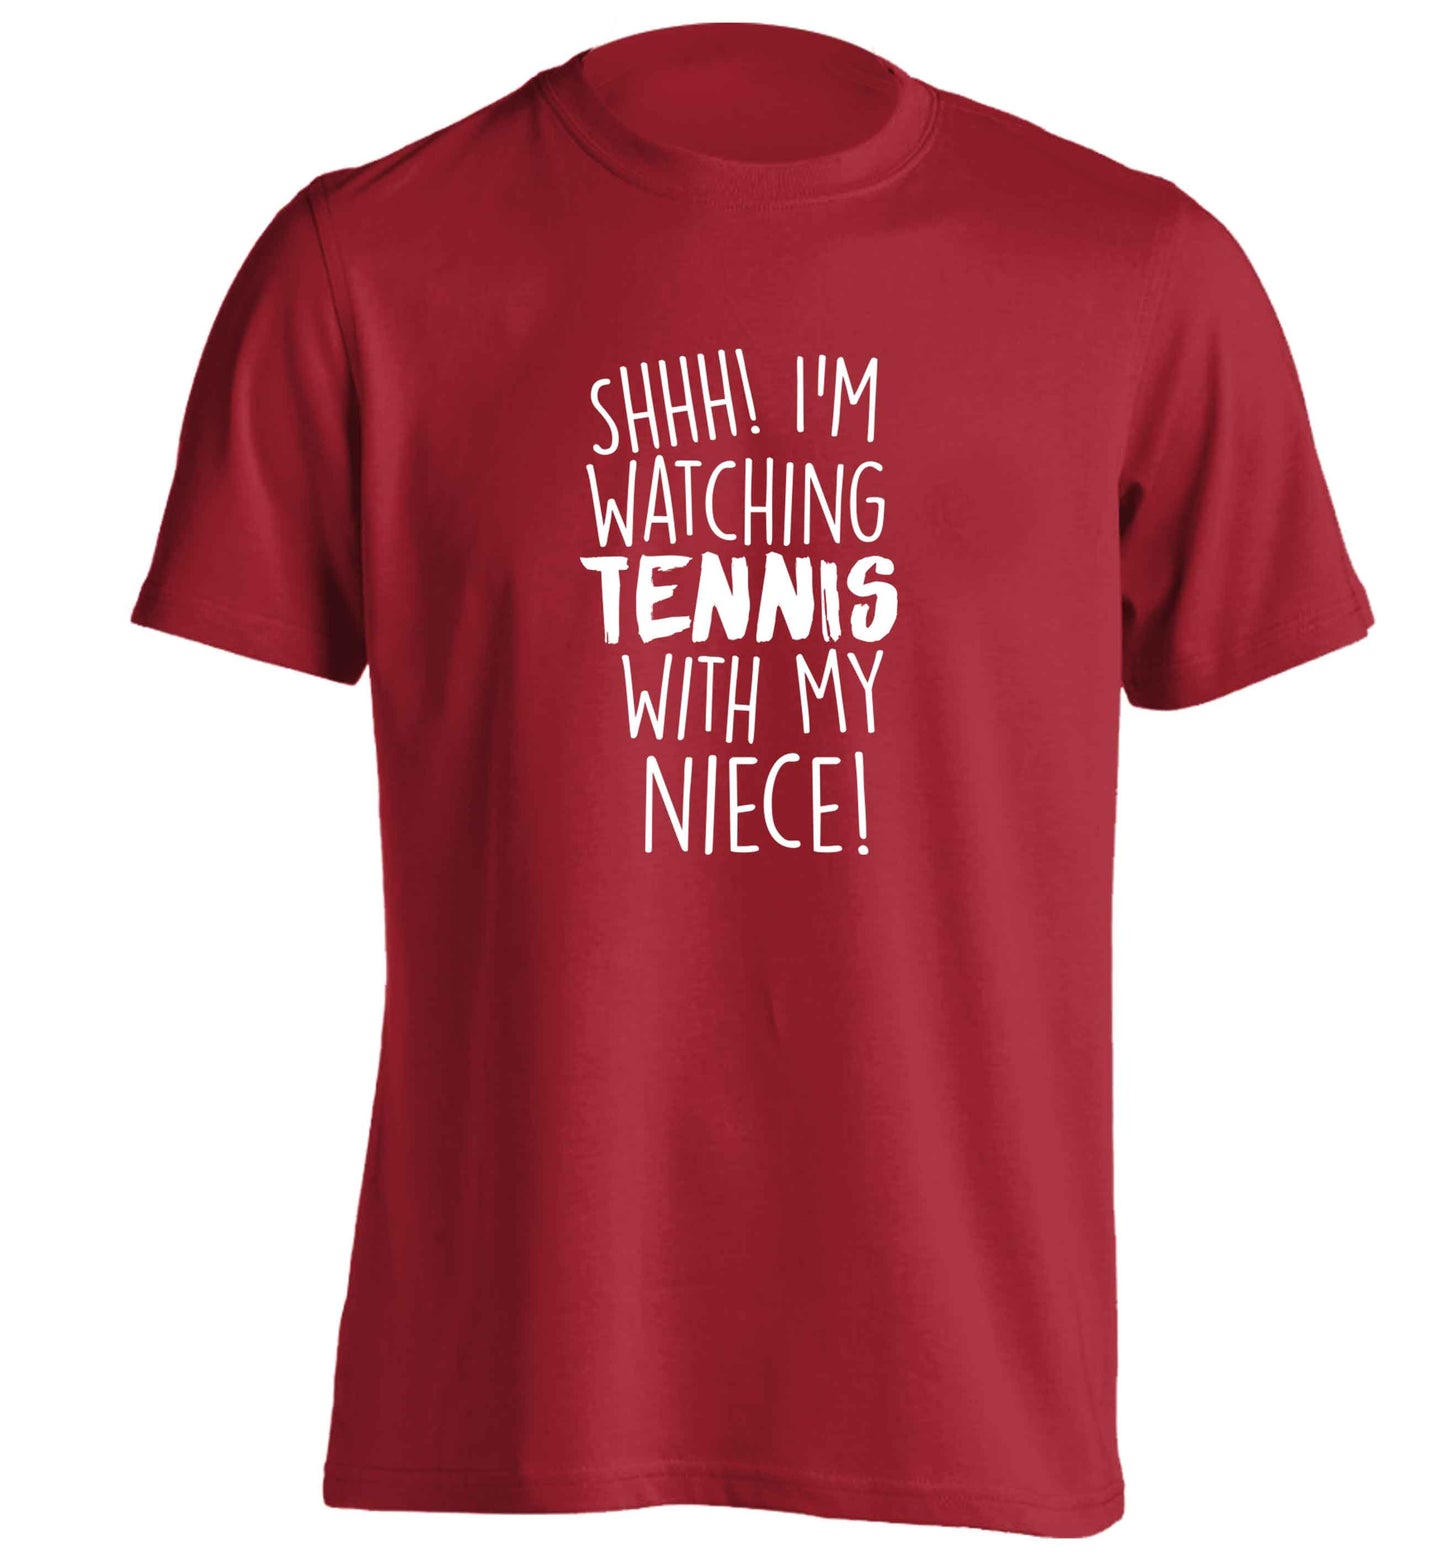 Shh! I'm watching tennis with my niece! adults unisex red Tshirt 2XL